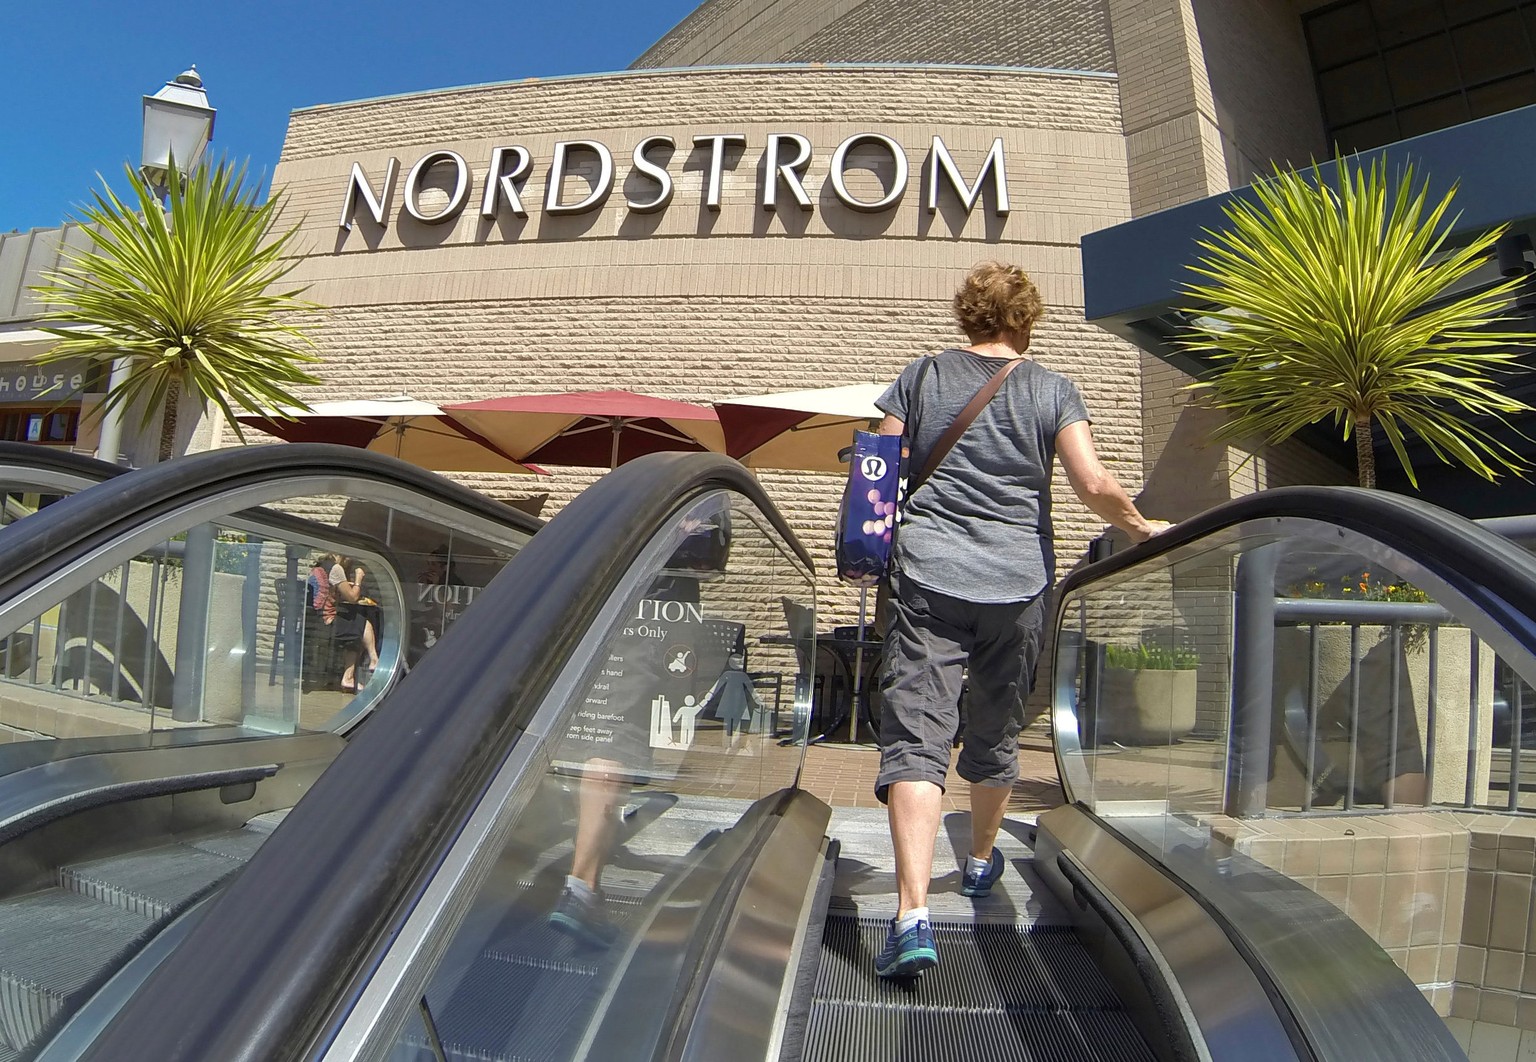 FILE PHOTO -- A Nordstrom department store is shown at a shopping center in San Diego, California September 10, 2014. REUTERS/Mike Blake/File Photo